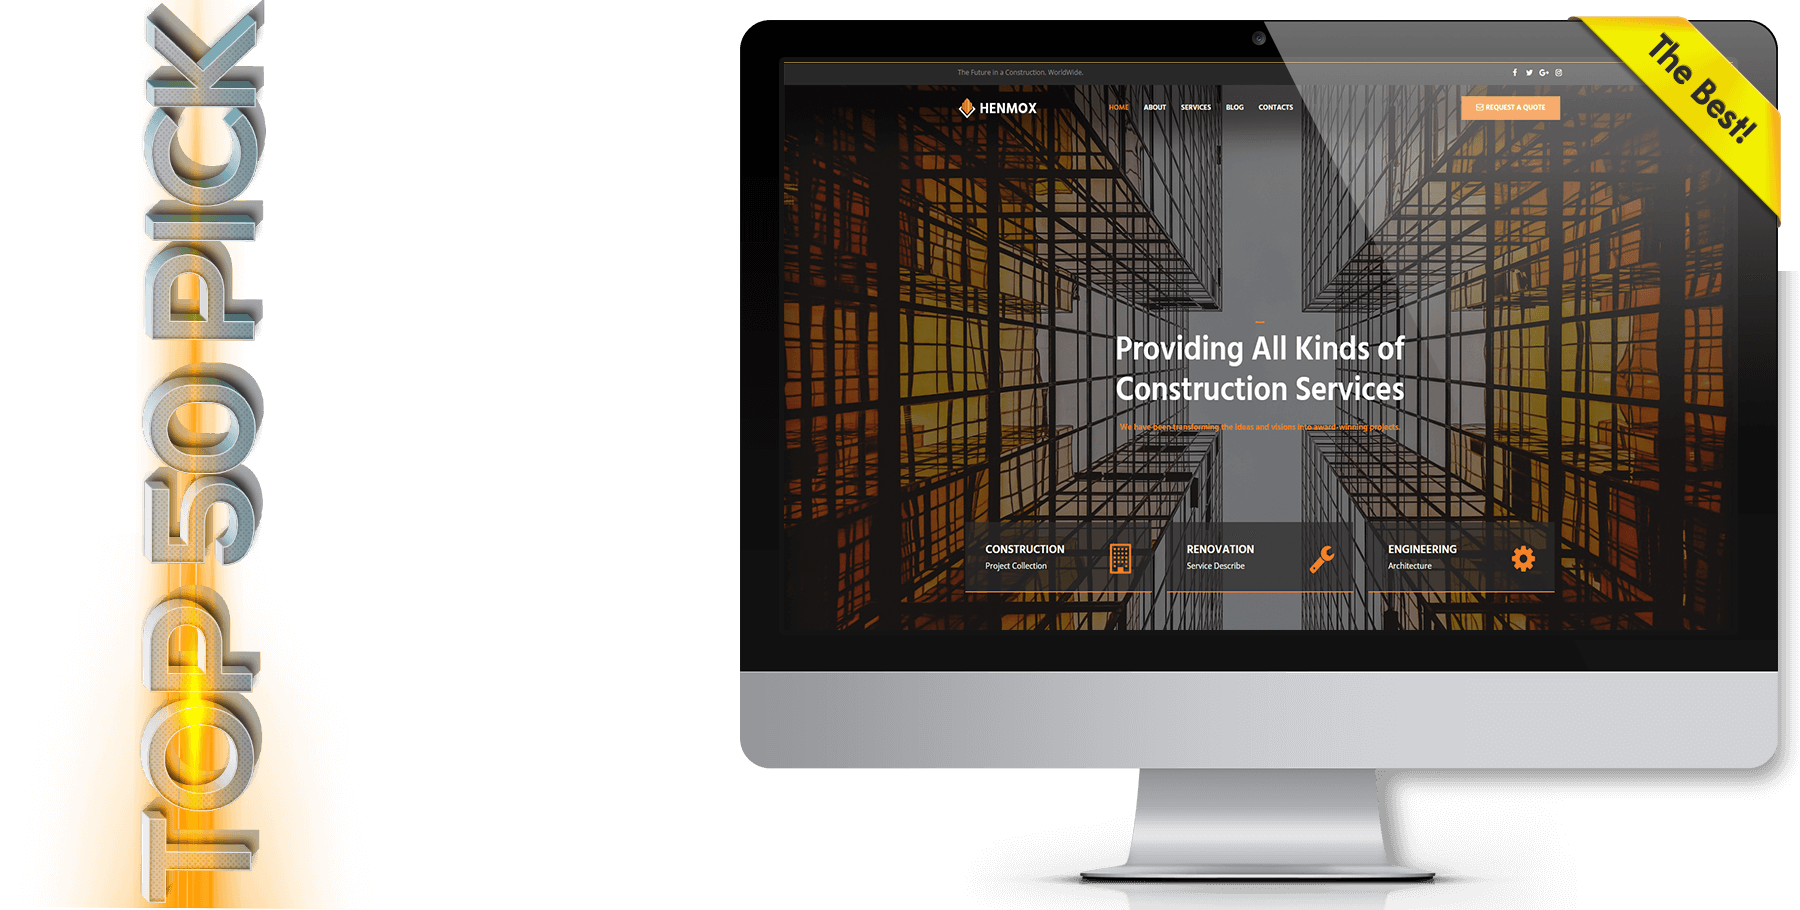 A website design in construction named Henmox